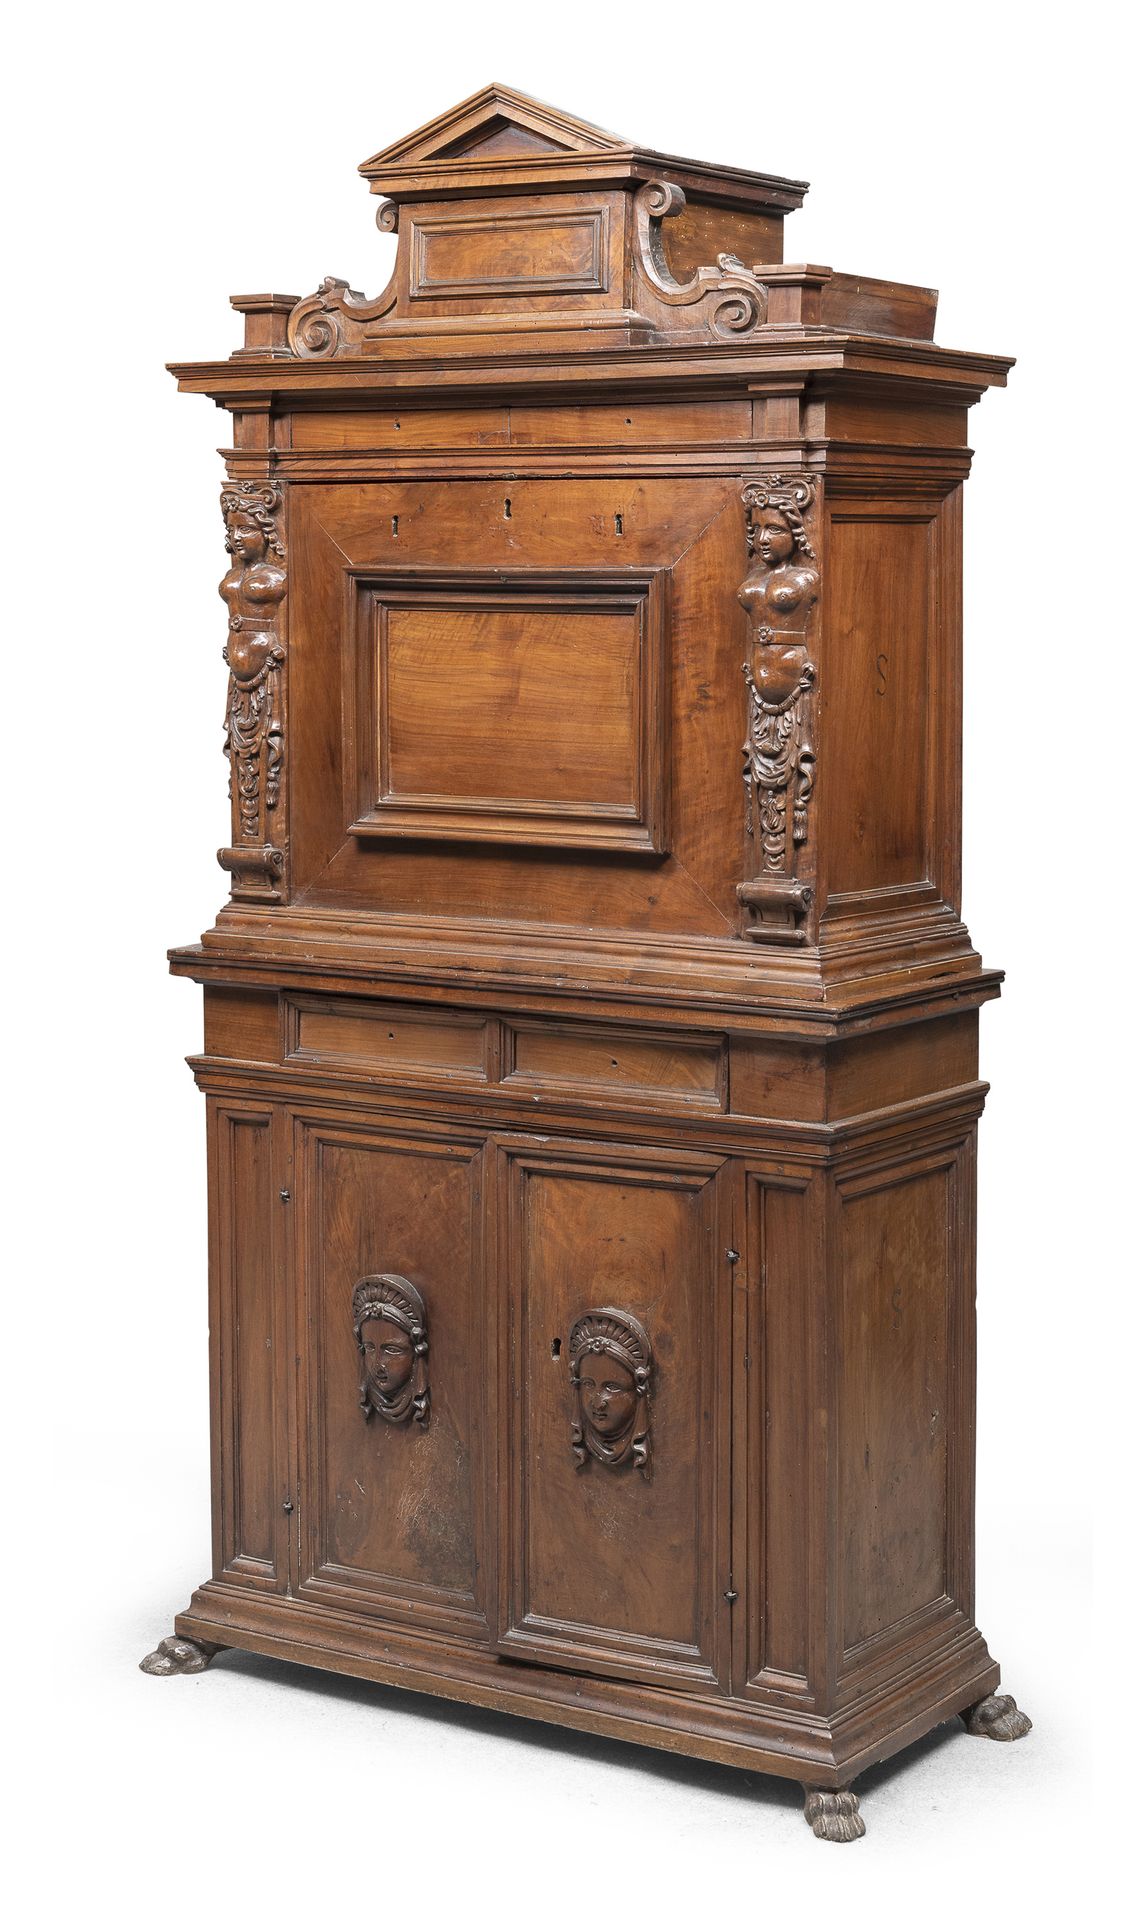 Null BEAUTIFUL TWO-BODY COIN CABINET, LIGURIA OR GENOA EARLY 18th CENTURY